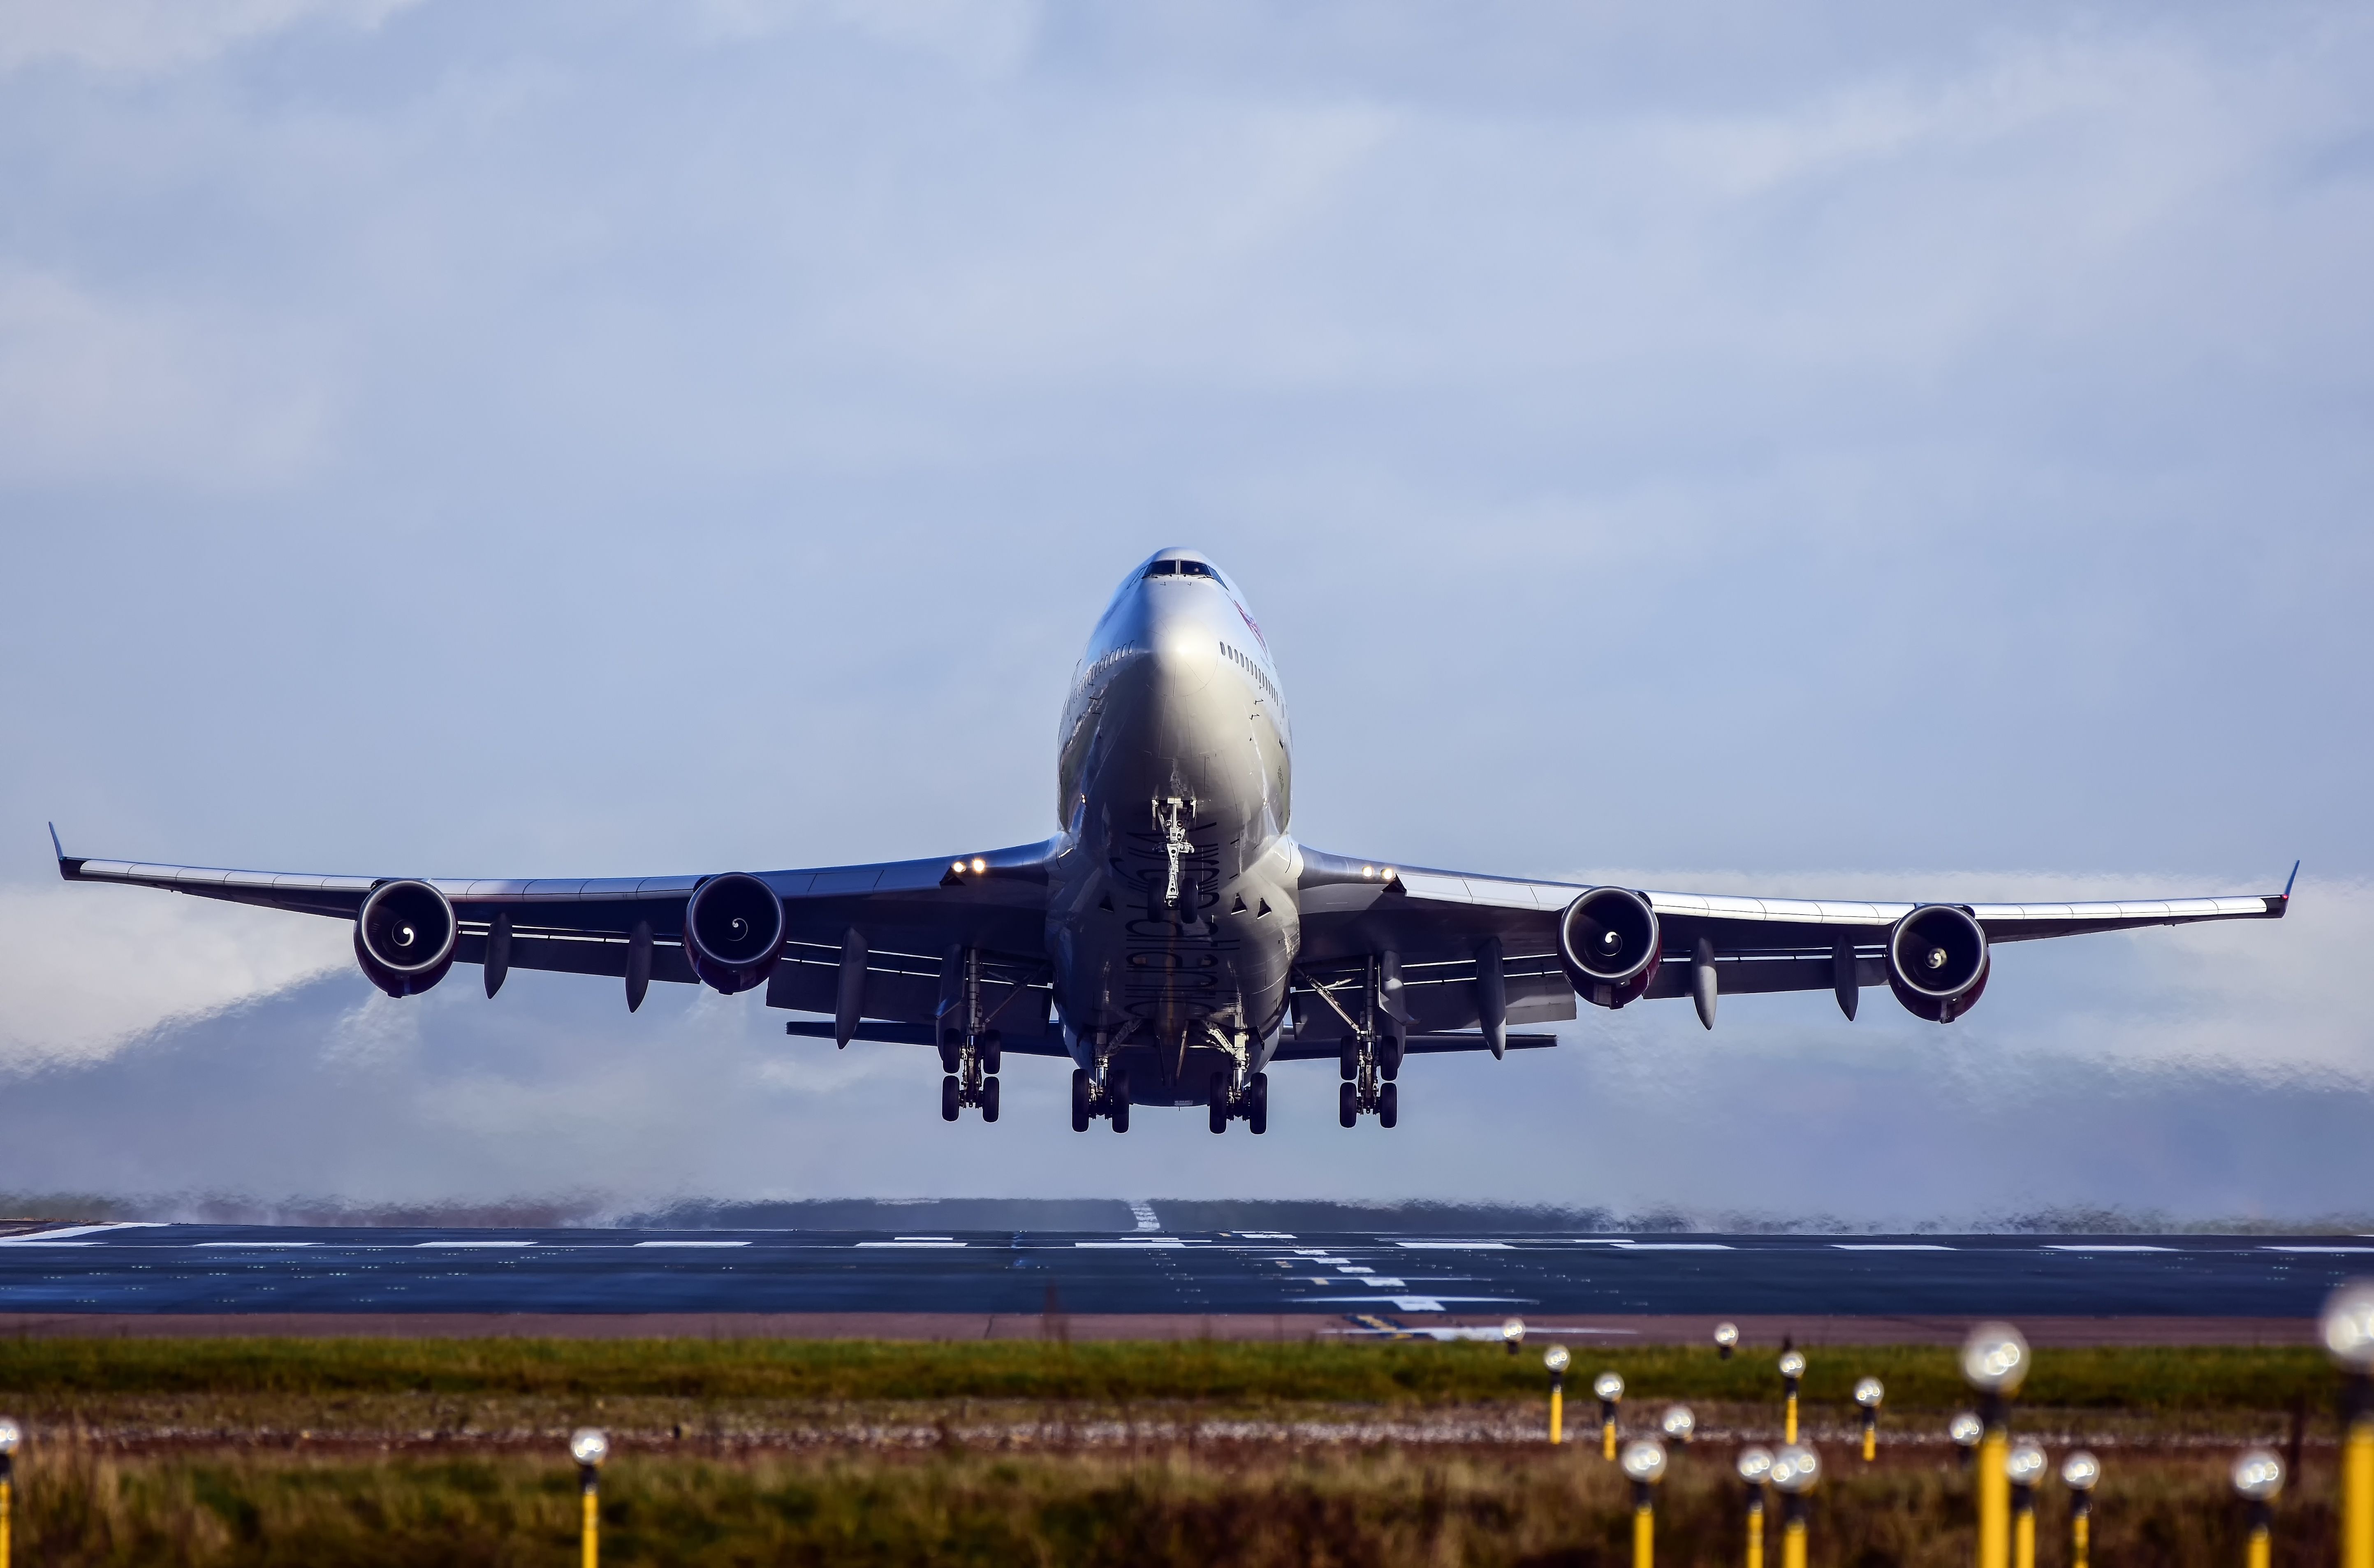 Boeing 747 from the front